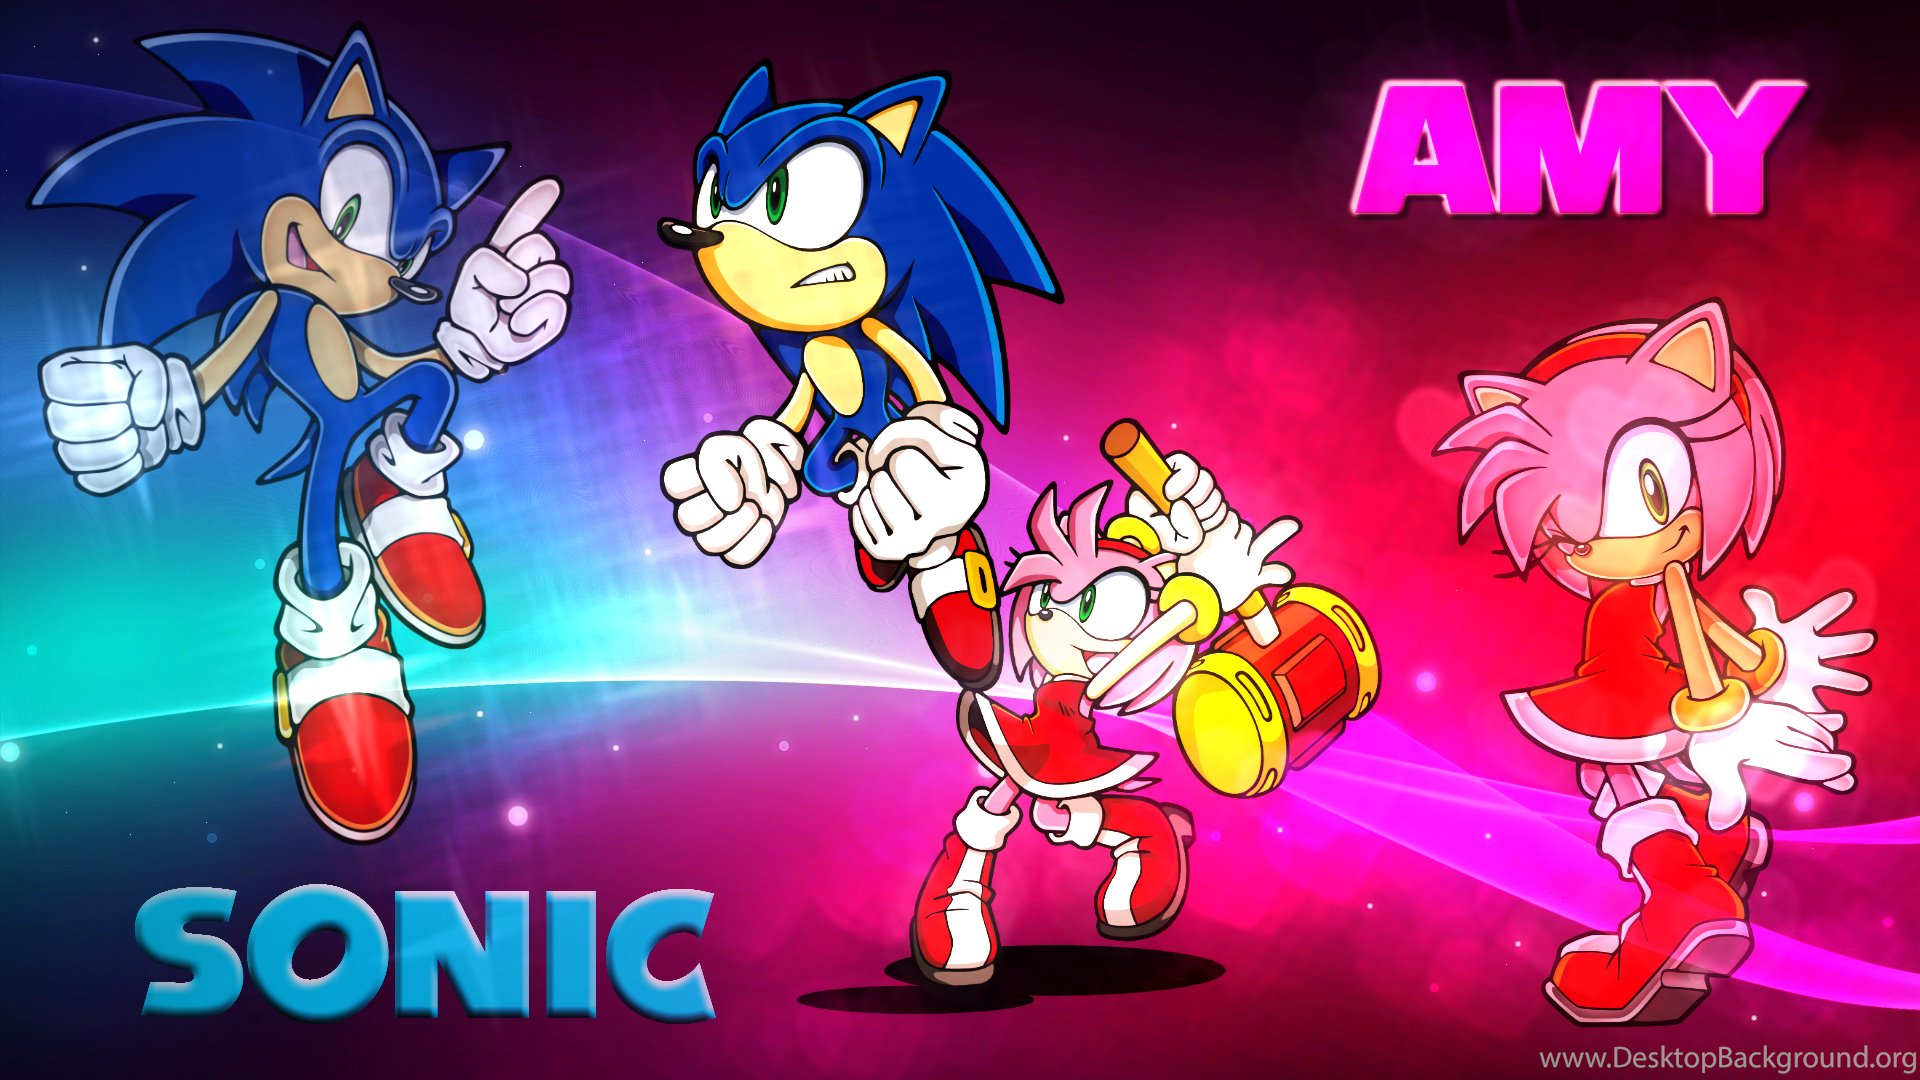 Wallpaper Sonic And Amy Desktop Background